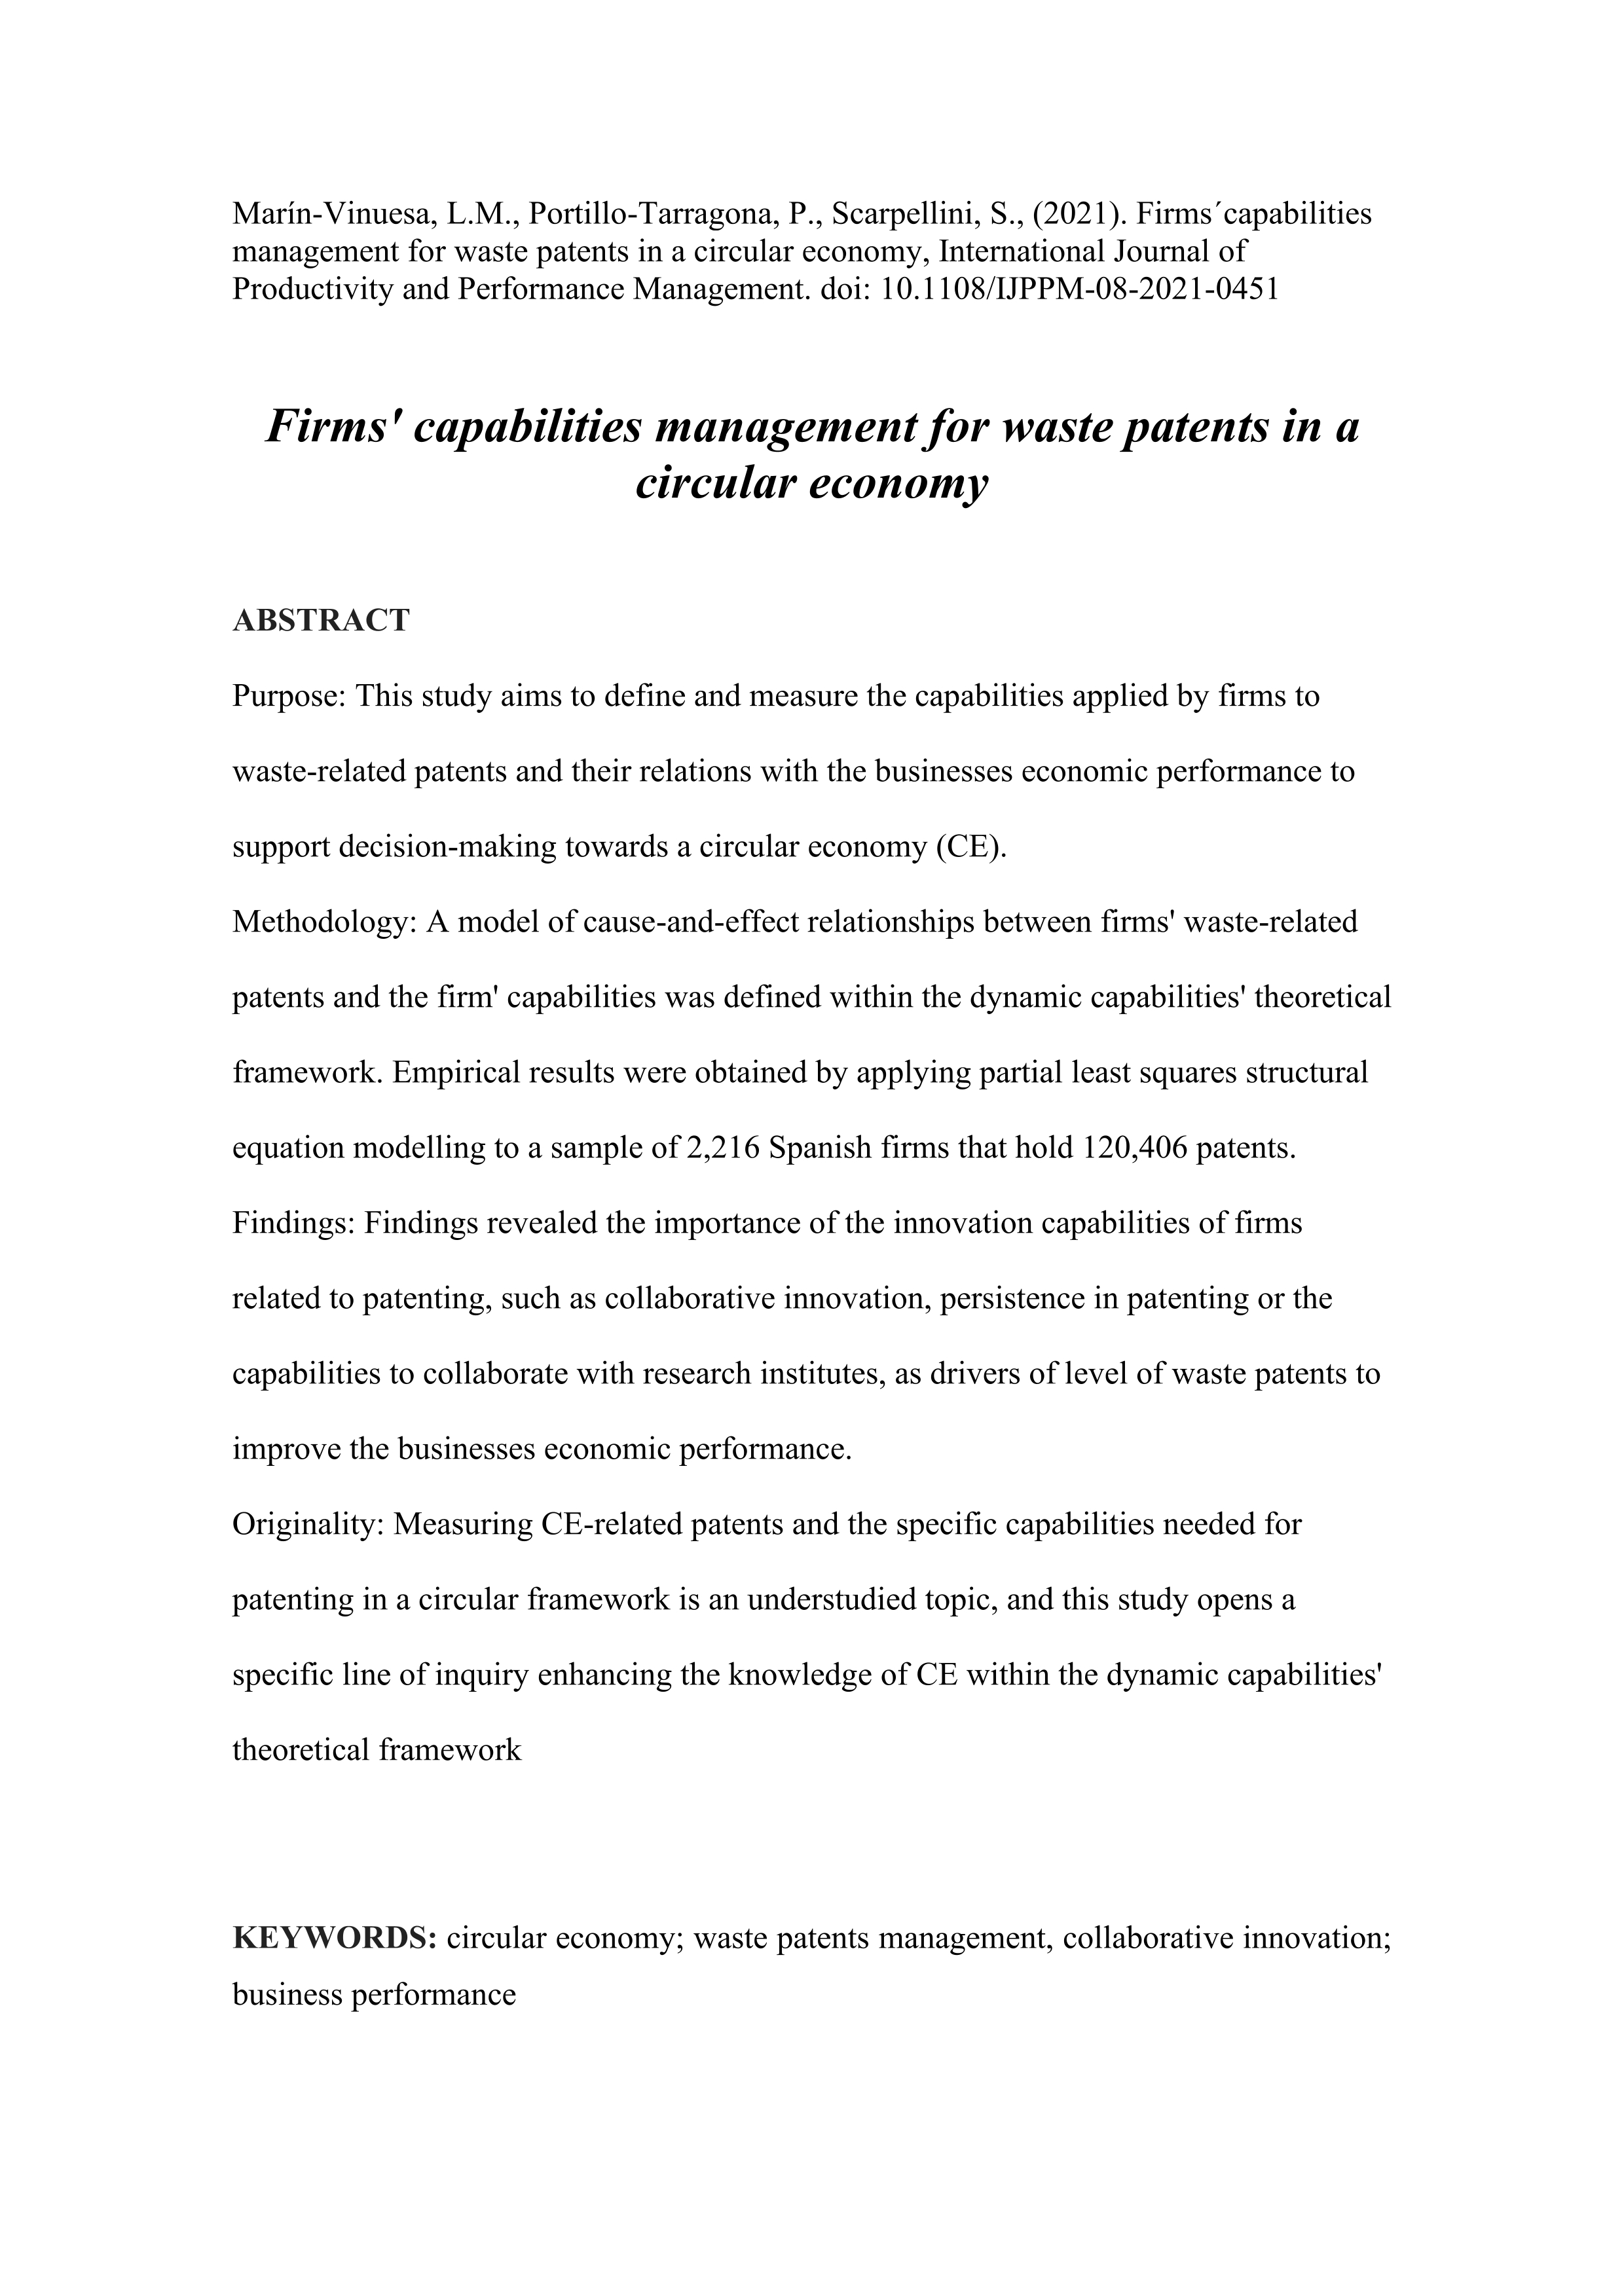 Firms'' capabilities management for waste patents in a circular economy